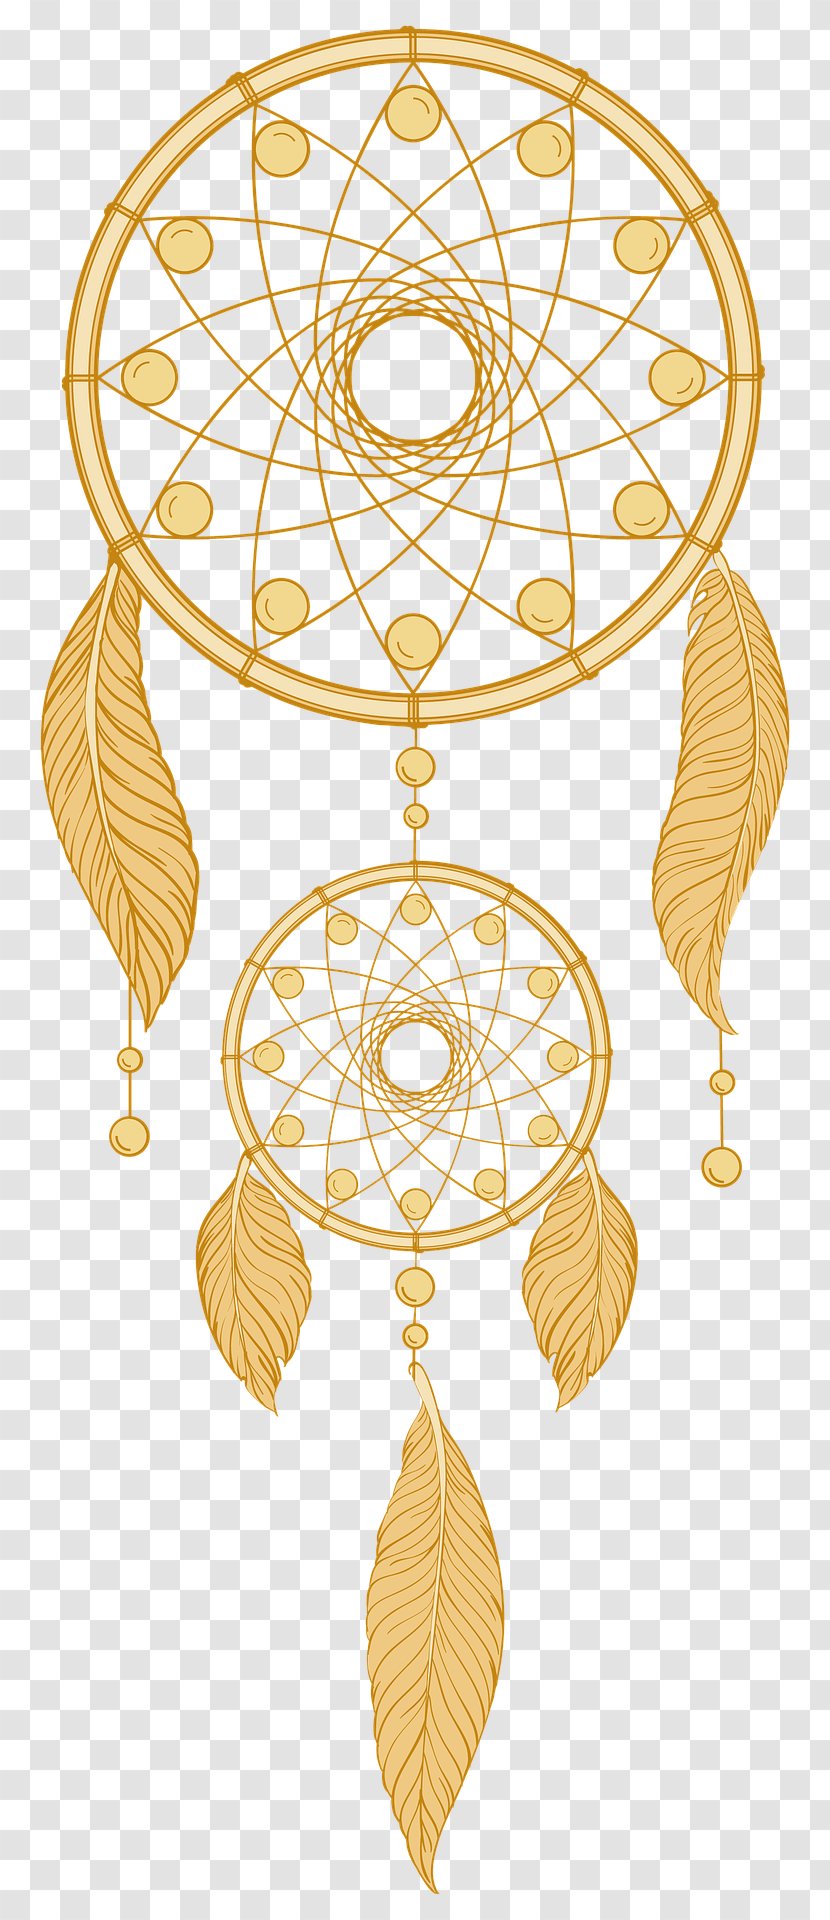 Dreamcatcher Native Americans In The United States Hinduism Medicine Wheel Transparent PNG